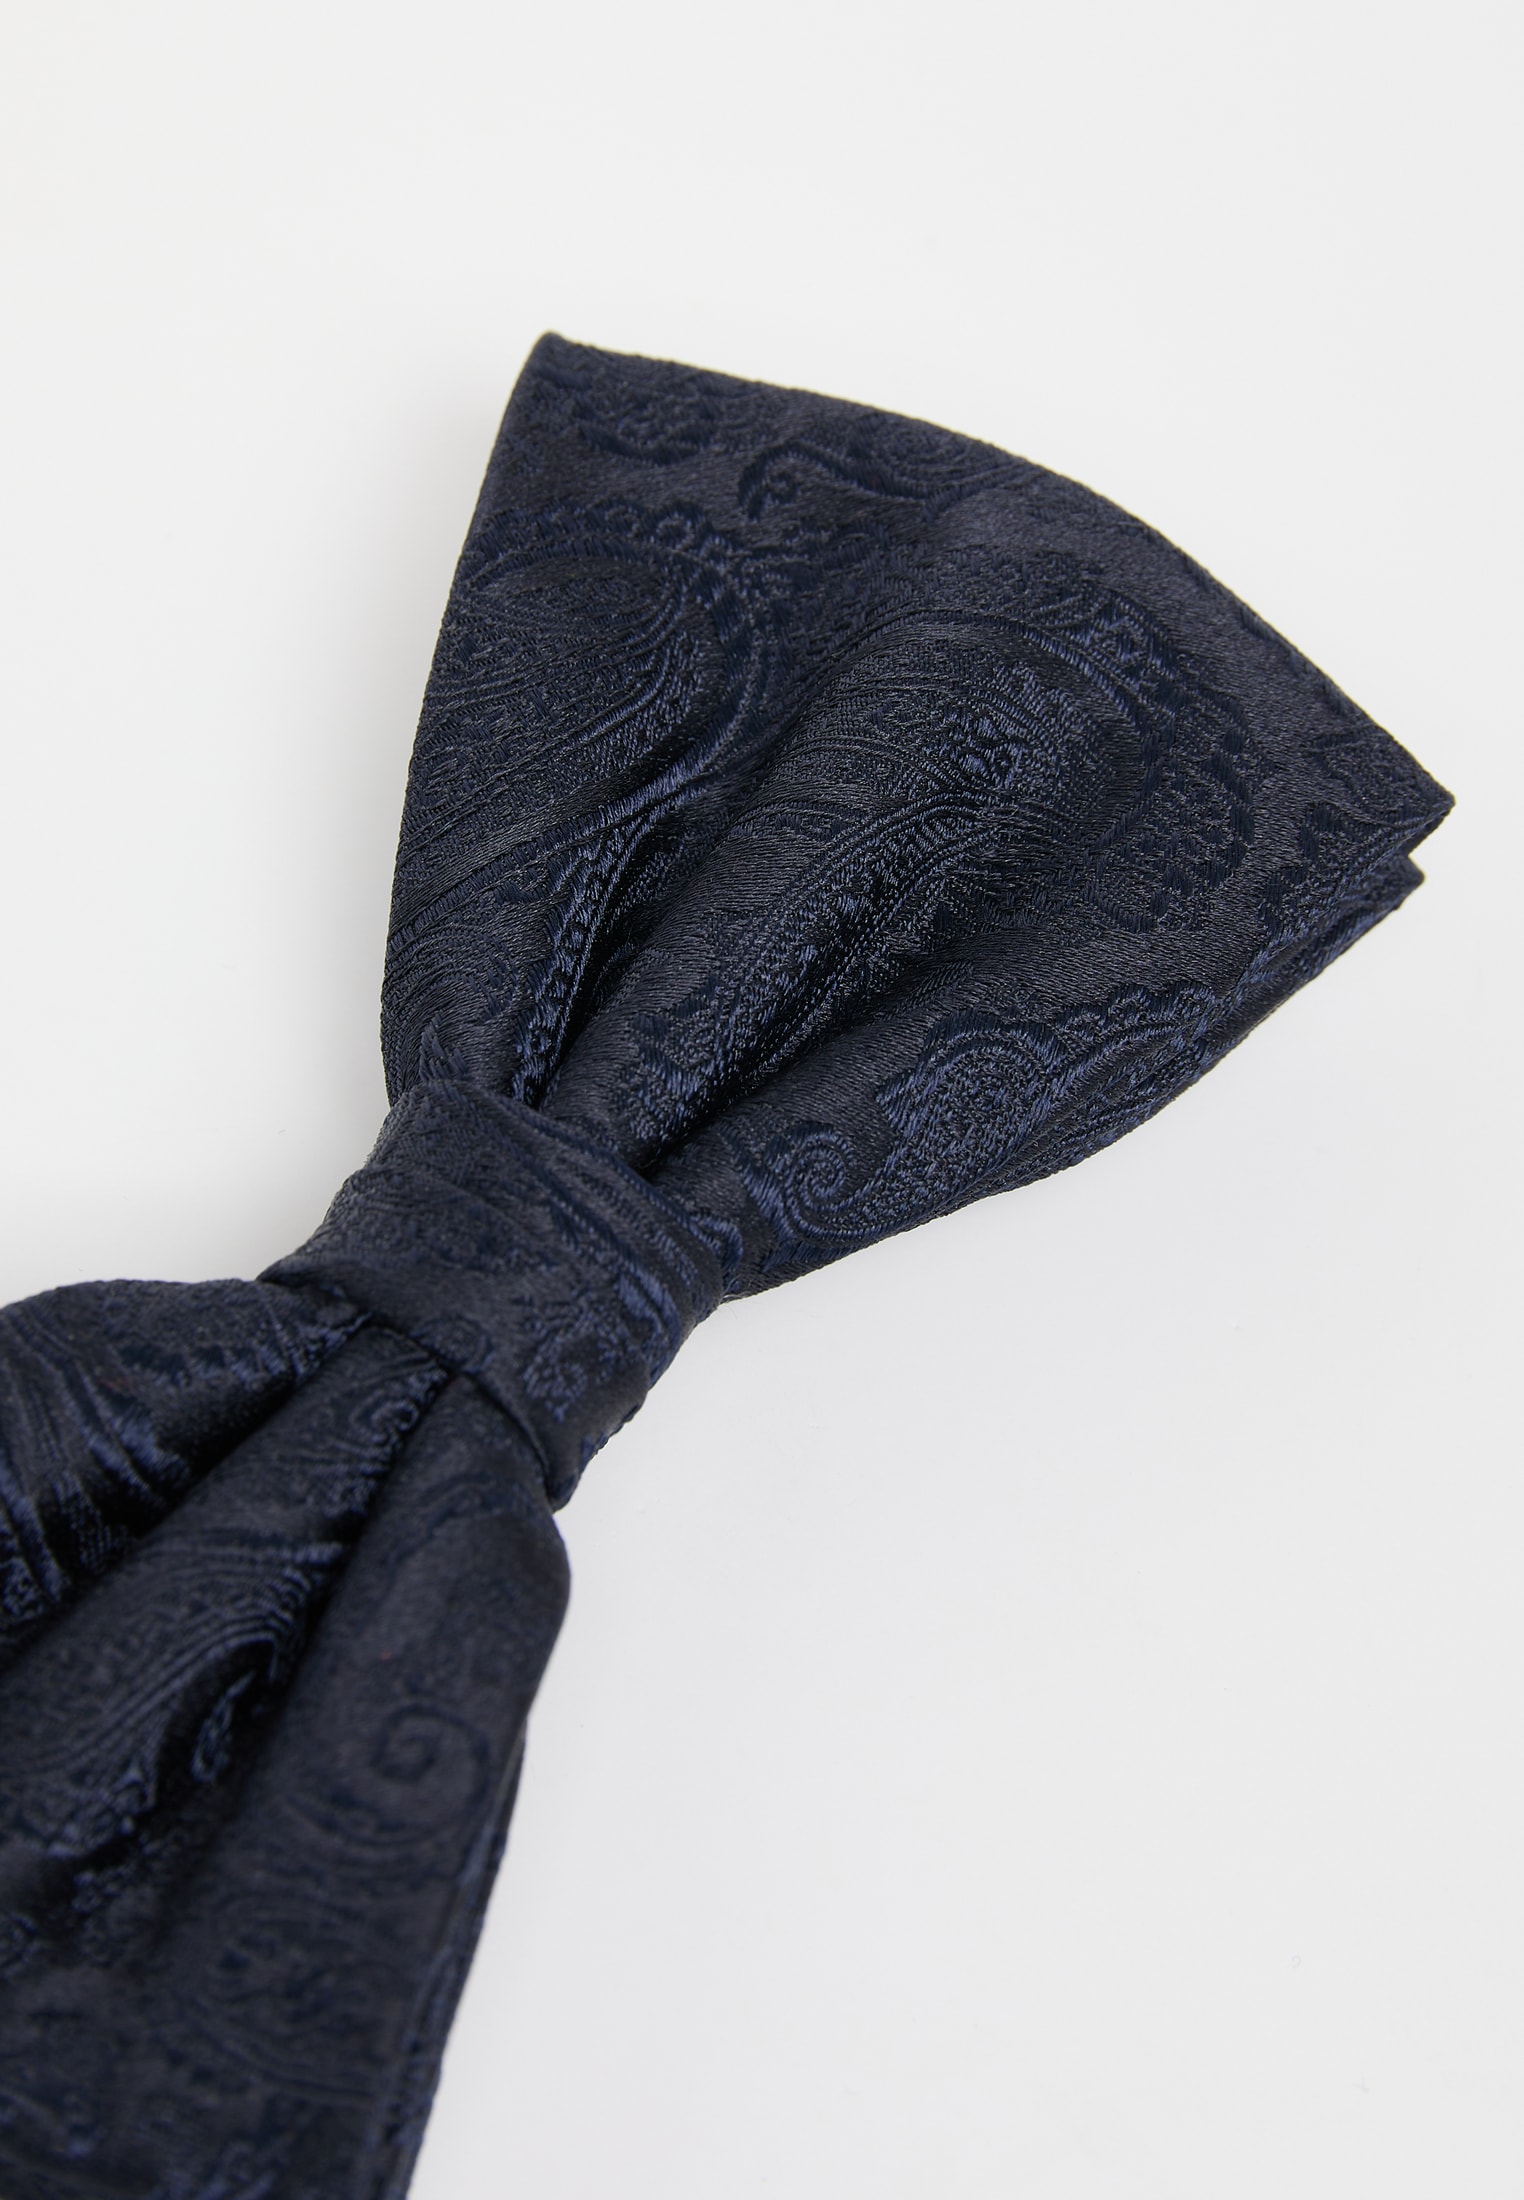 Bowtie in midnight patterned